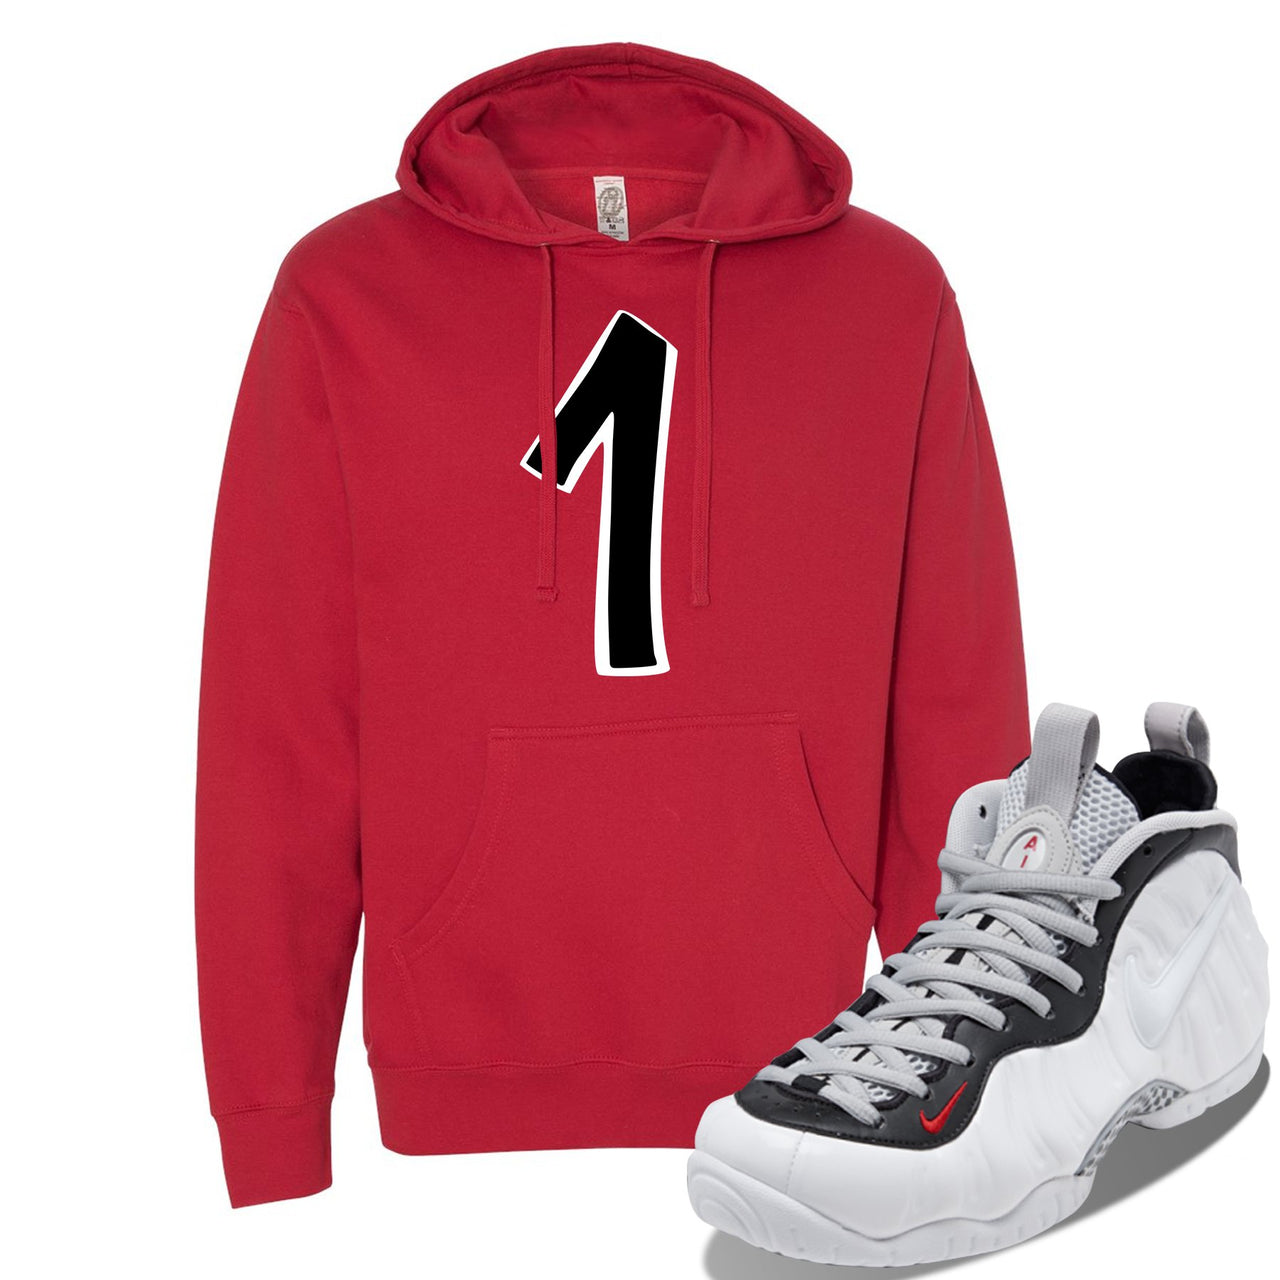 Foamposite Pro White Black University Red Sneaker Red Pullover Hoodie | Hoodie to match Nike Air Foamposite Pro White Black University Red Shoes | Penny One